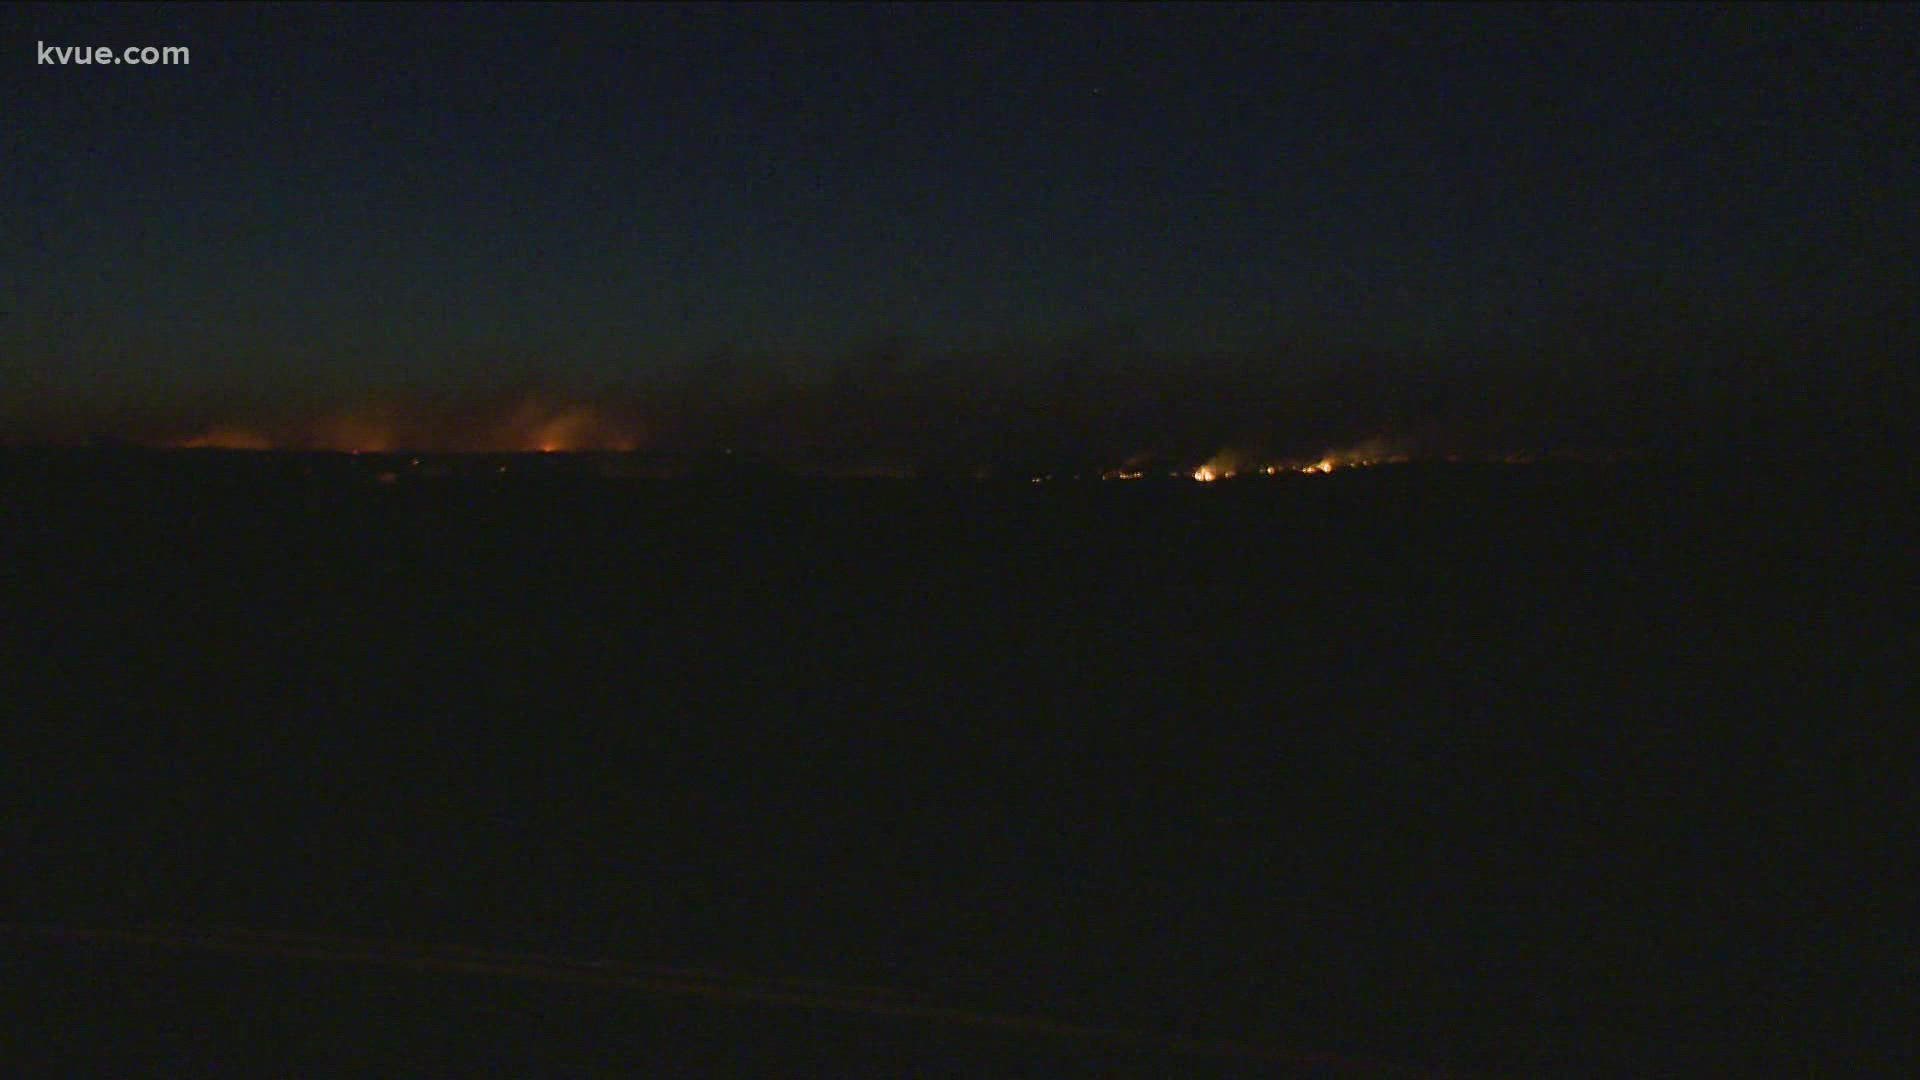 The "Buddy Fire" that's been burning in Blanco County is now 90% contained. It has burned more than 1,300 acres.